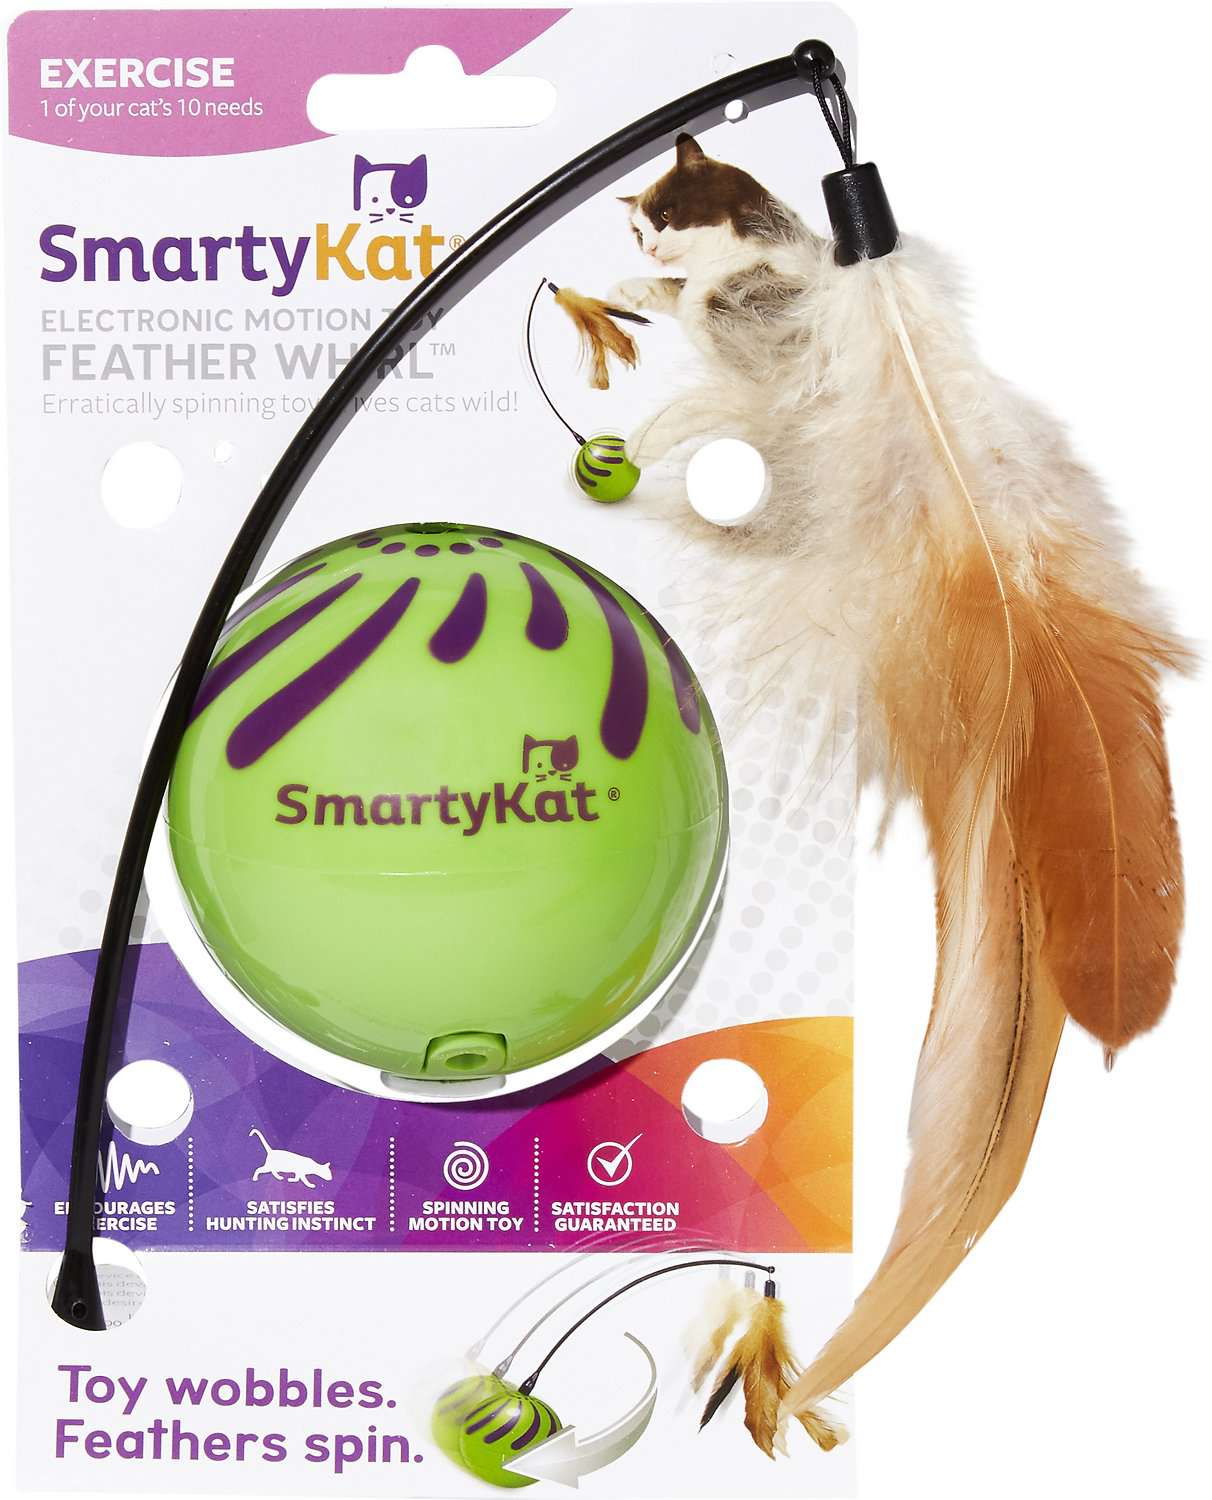 SmartyKat Feather Whirl Electronic Motion Cat toy